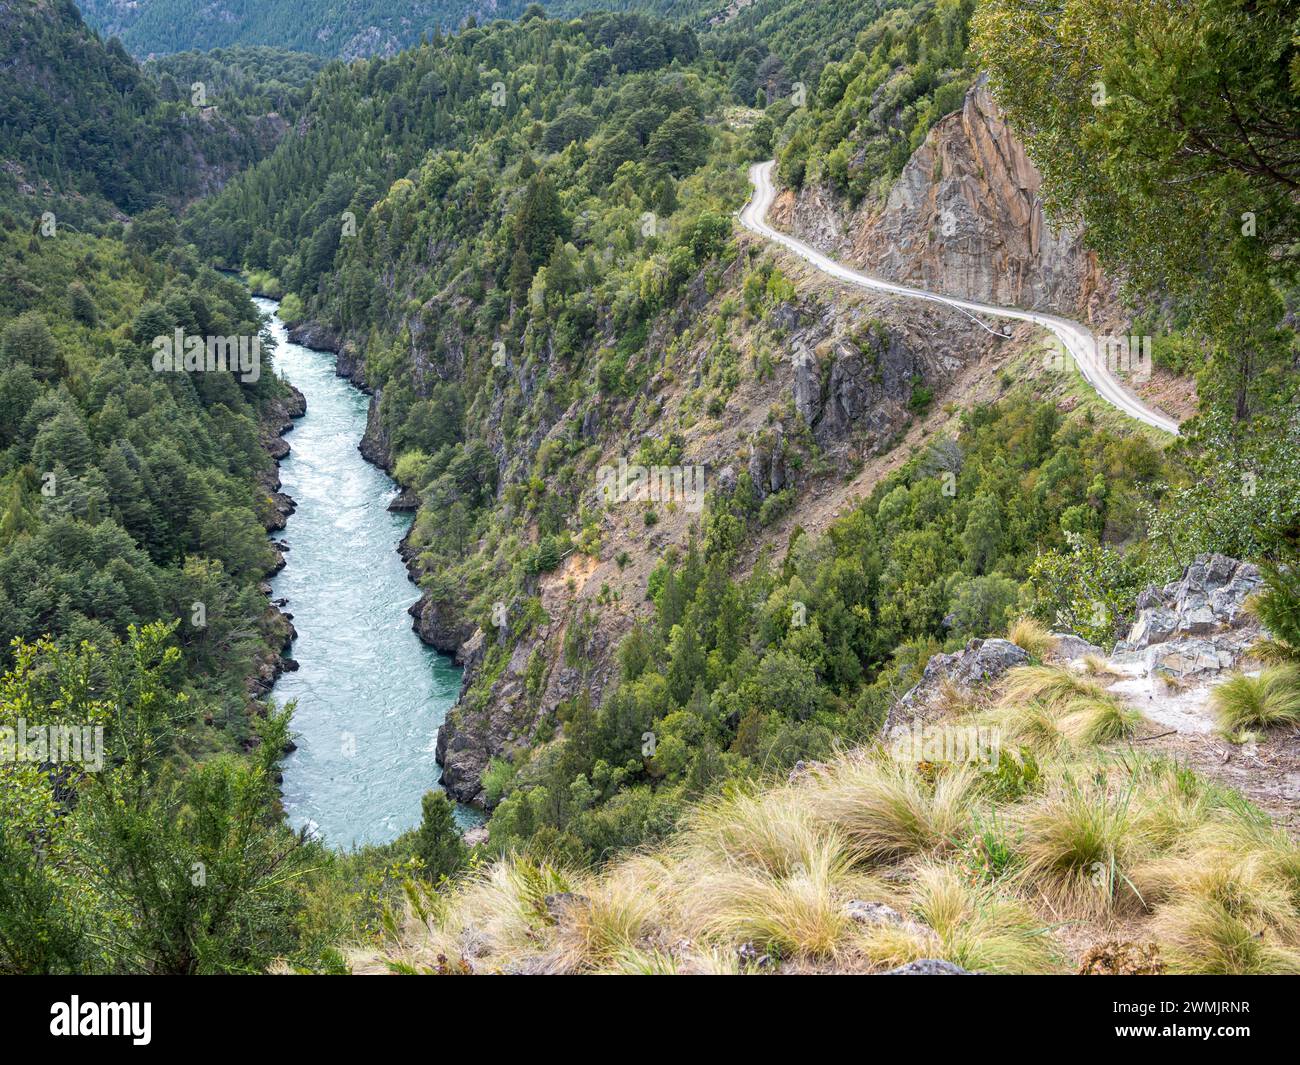 Futaleufu river flowing in a deep gorge, viewpoint Mirador del Diablo, mountain road built into steep walls of rock, aerial view, Patagonia, Chile Stock Photo